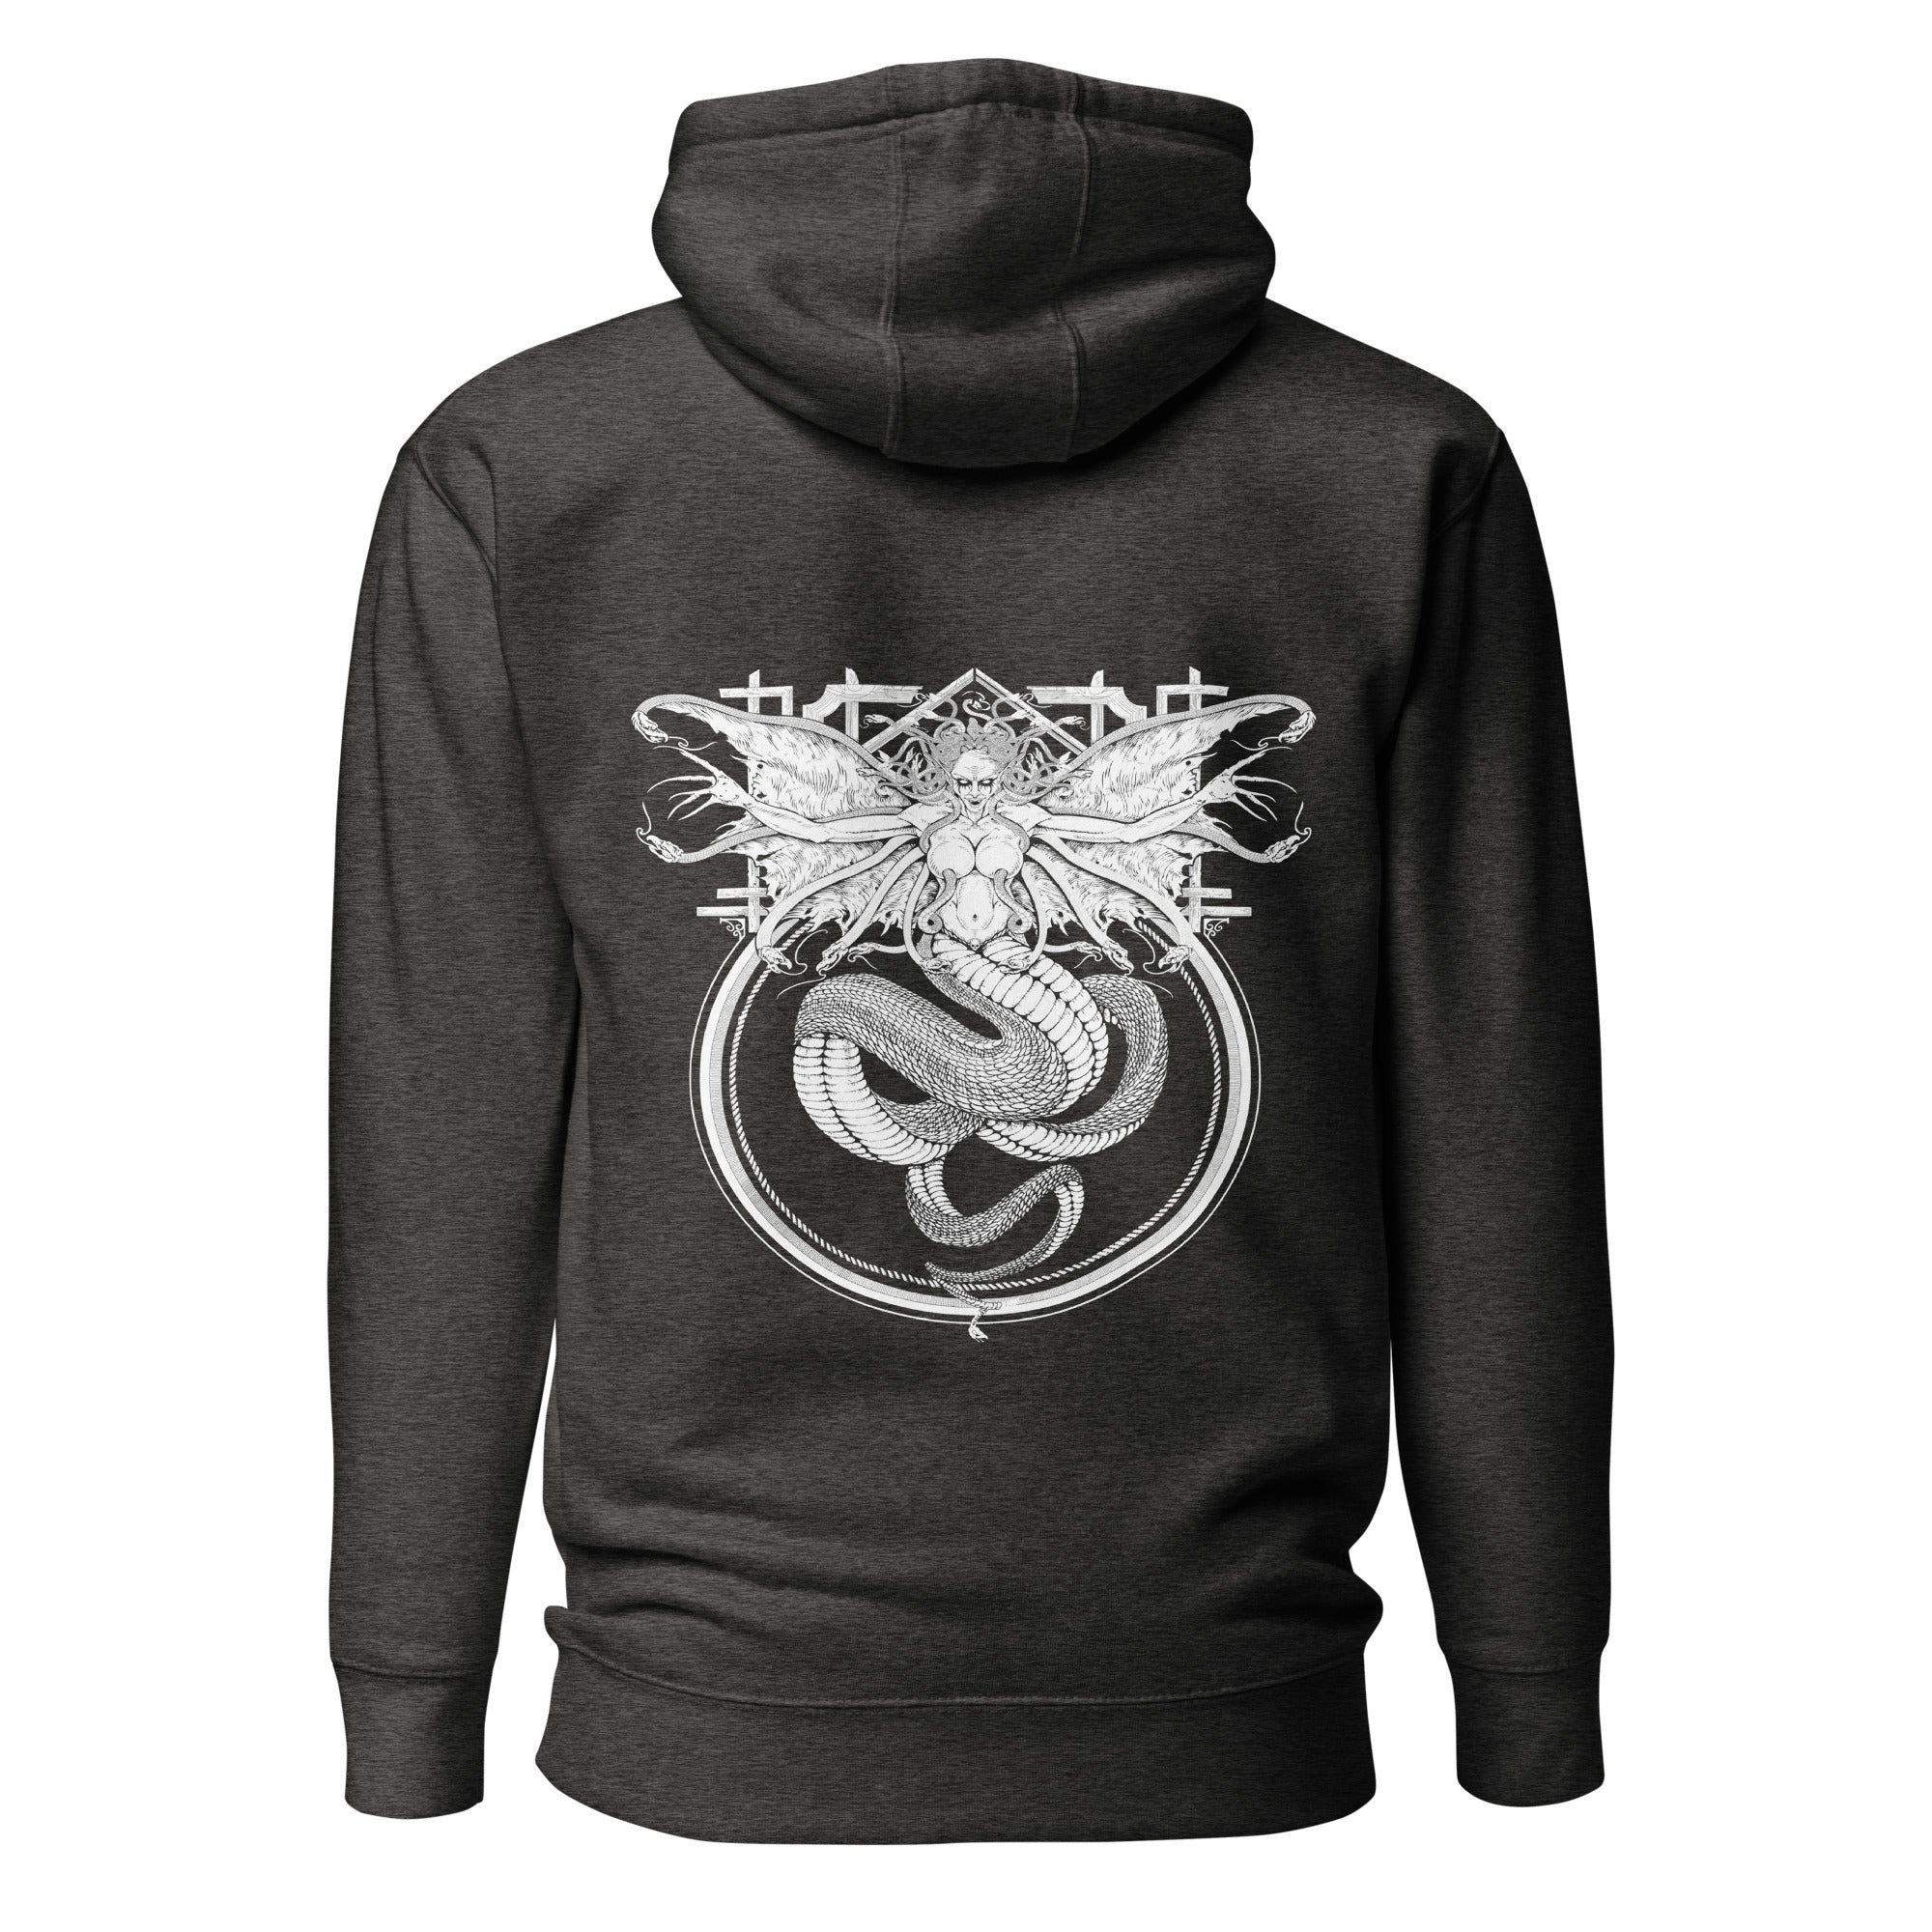 Sinister - Pullover Hoodie